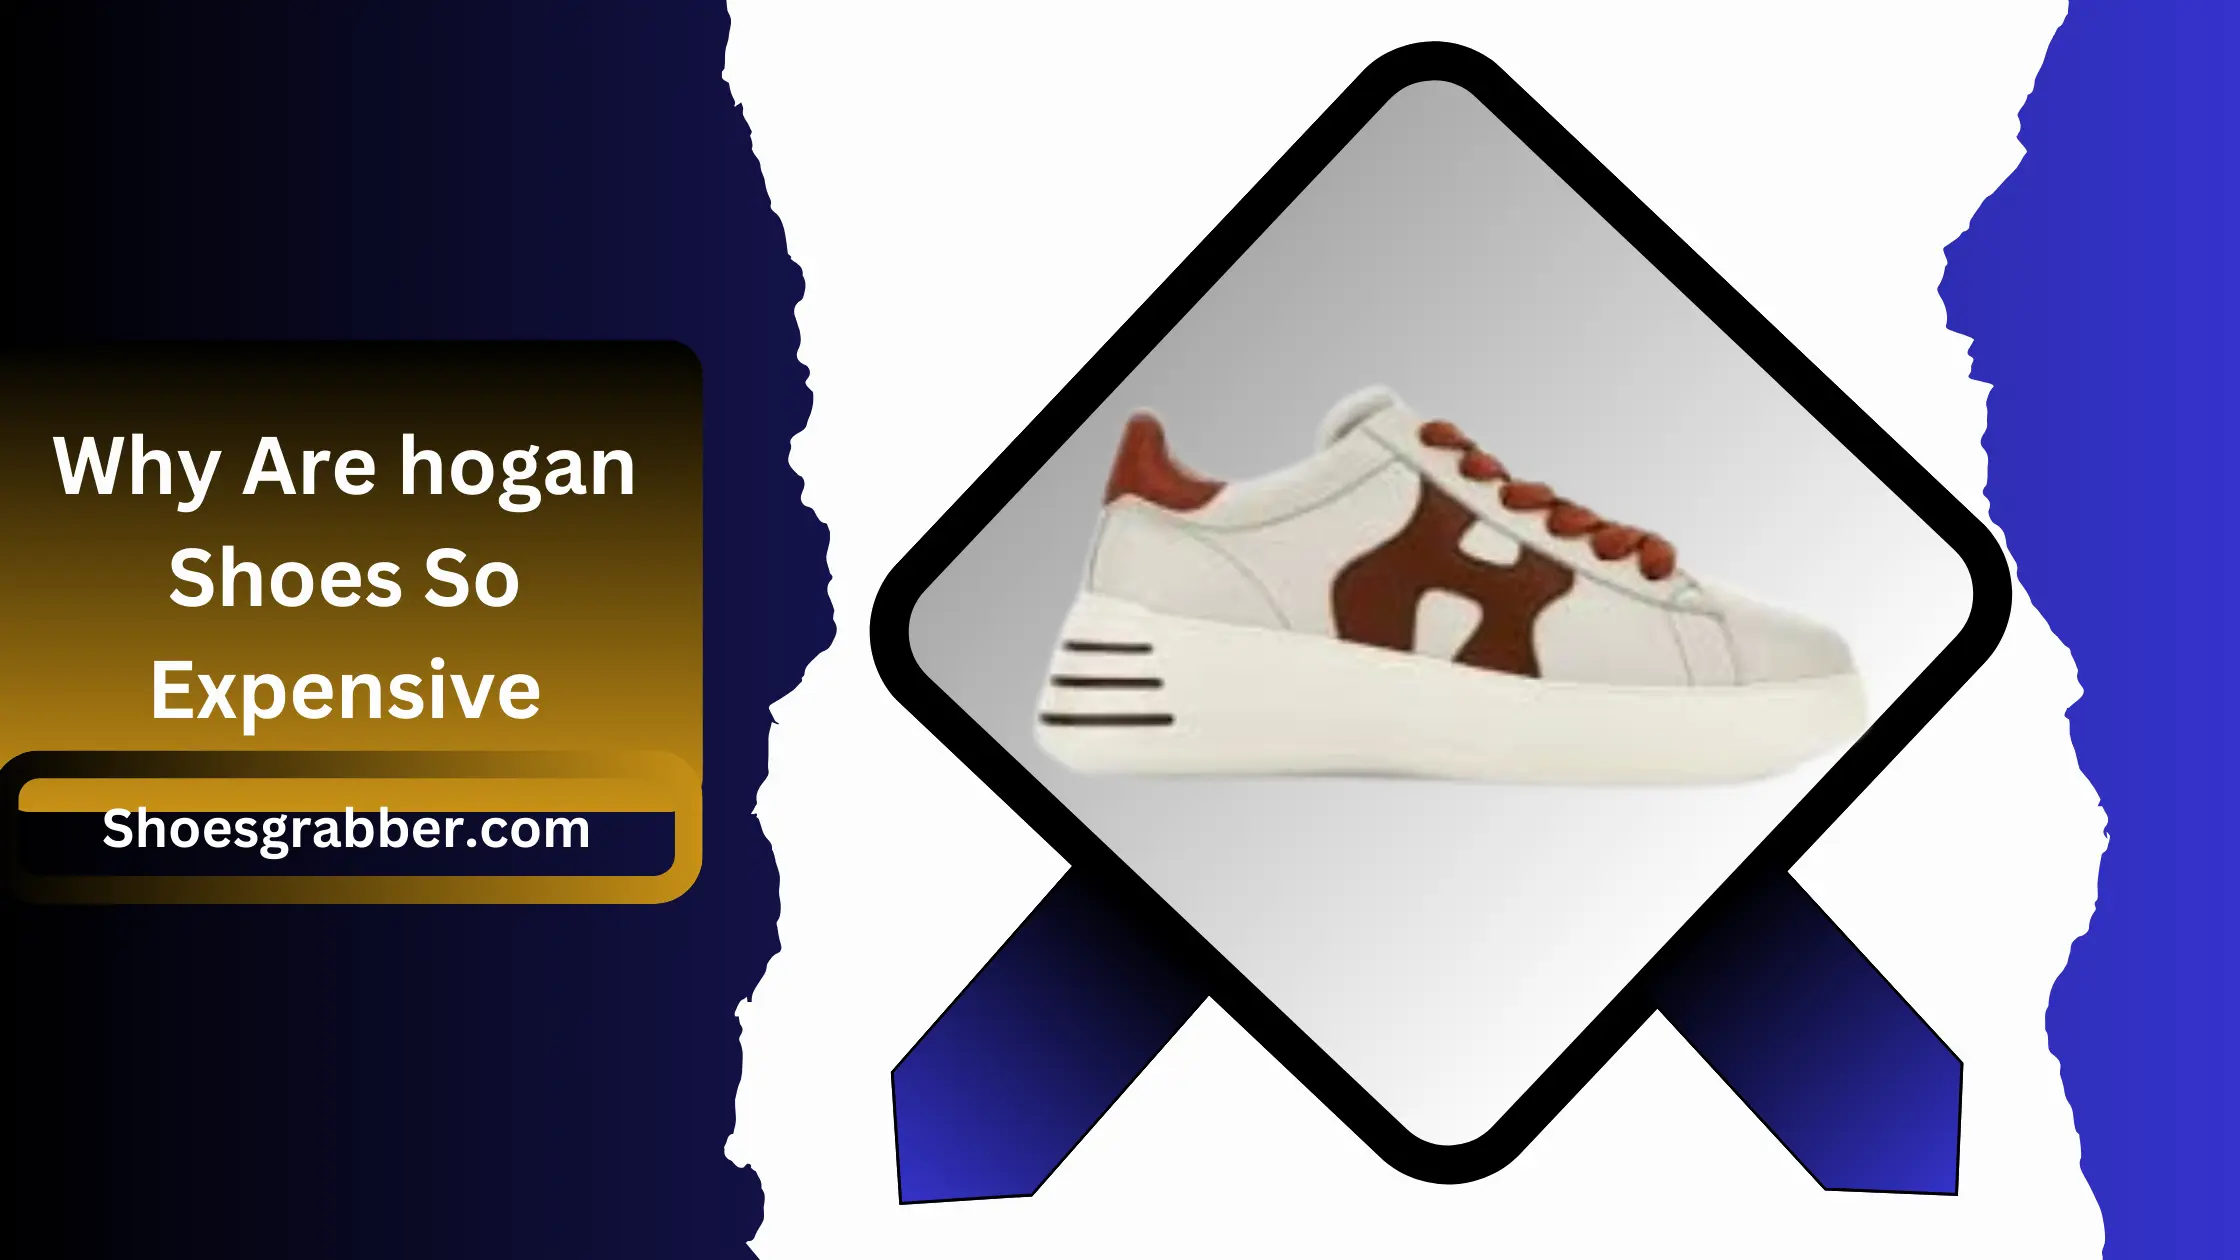 Why Are hogan Shoes So Expensive - An In-Depth Look